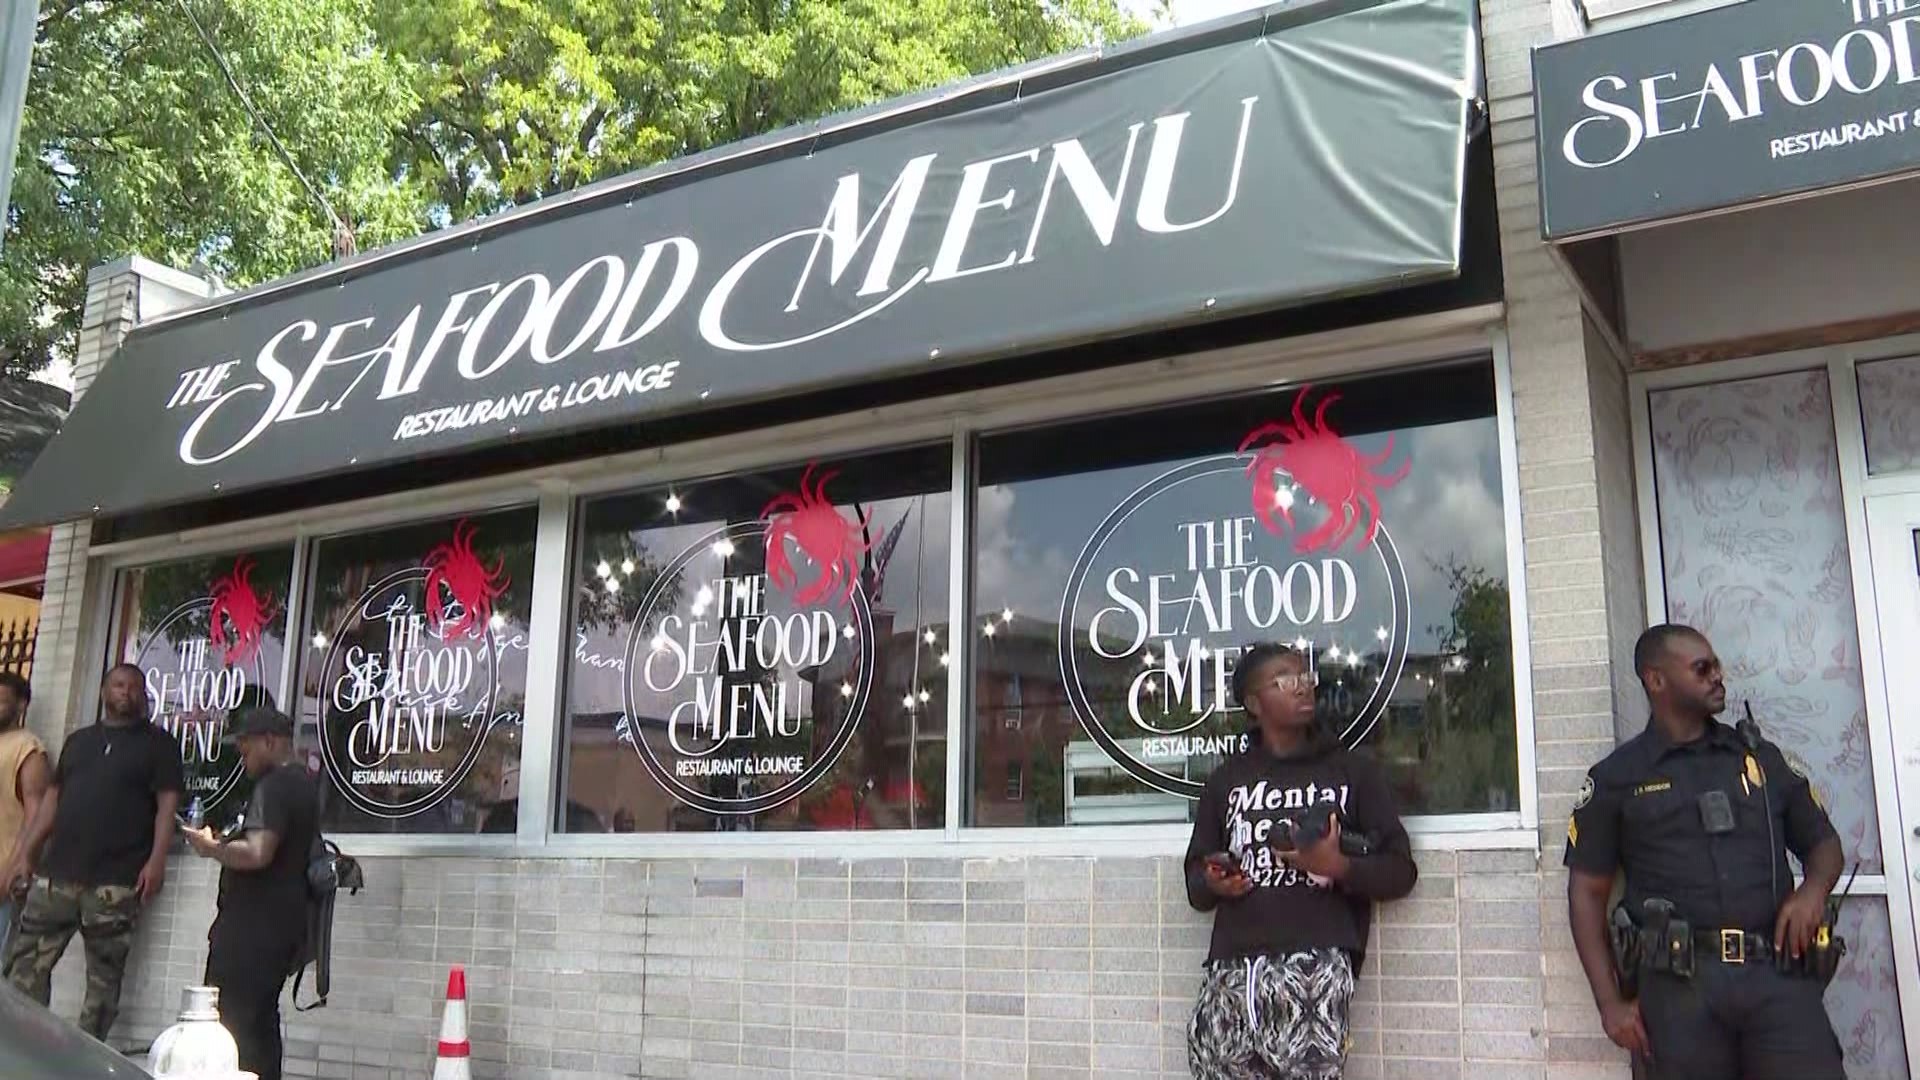 The Seafood Menu Restaurant and Takeout had its grand opening on Friday at 2 p.m.